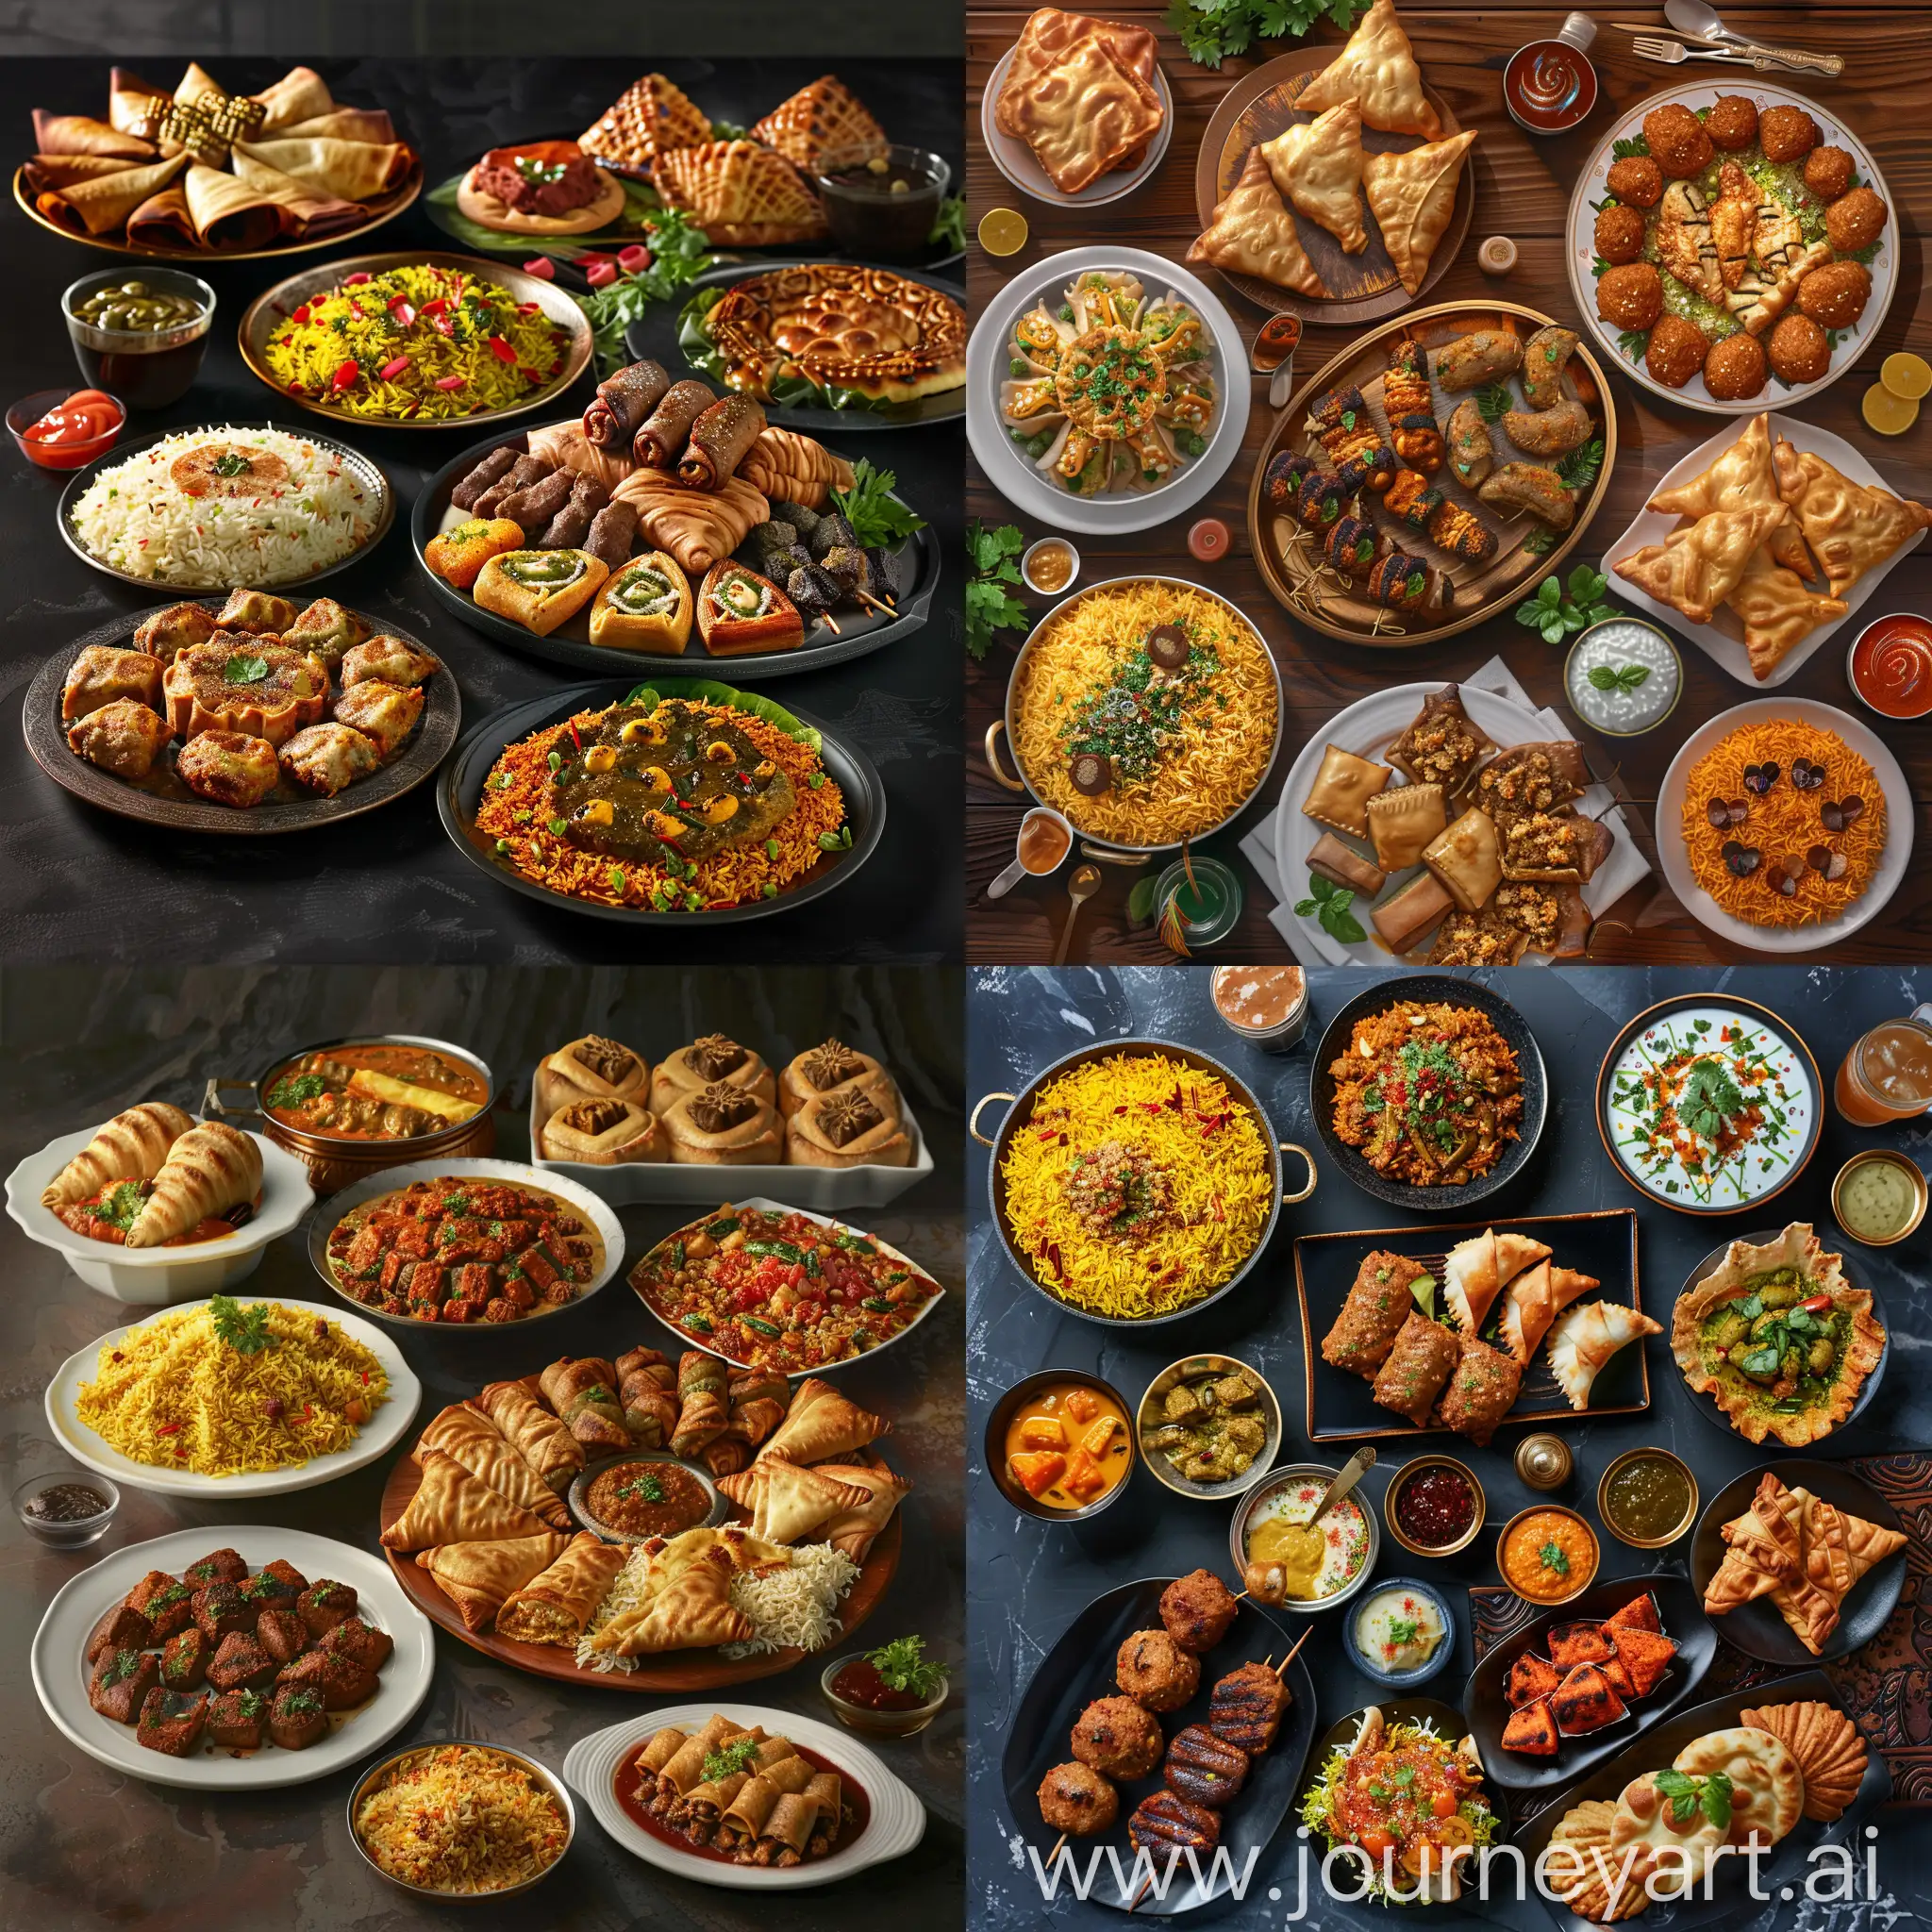 Produce a hyper-realistic photo. Craft an image that showcases a selection of traditional dishes such as biryani, kebabs, samosas, and desserts like baklava and maamoul, all beautifully arranged on the dinner